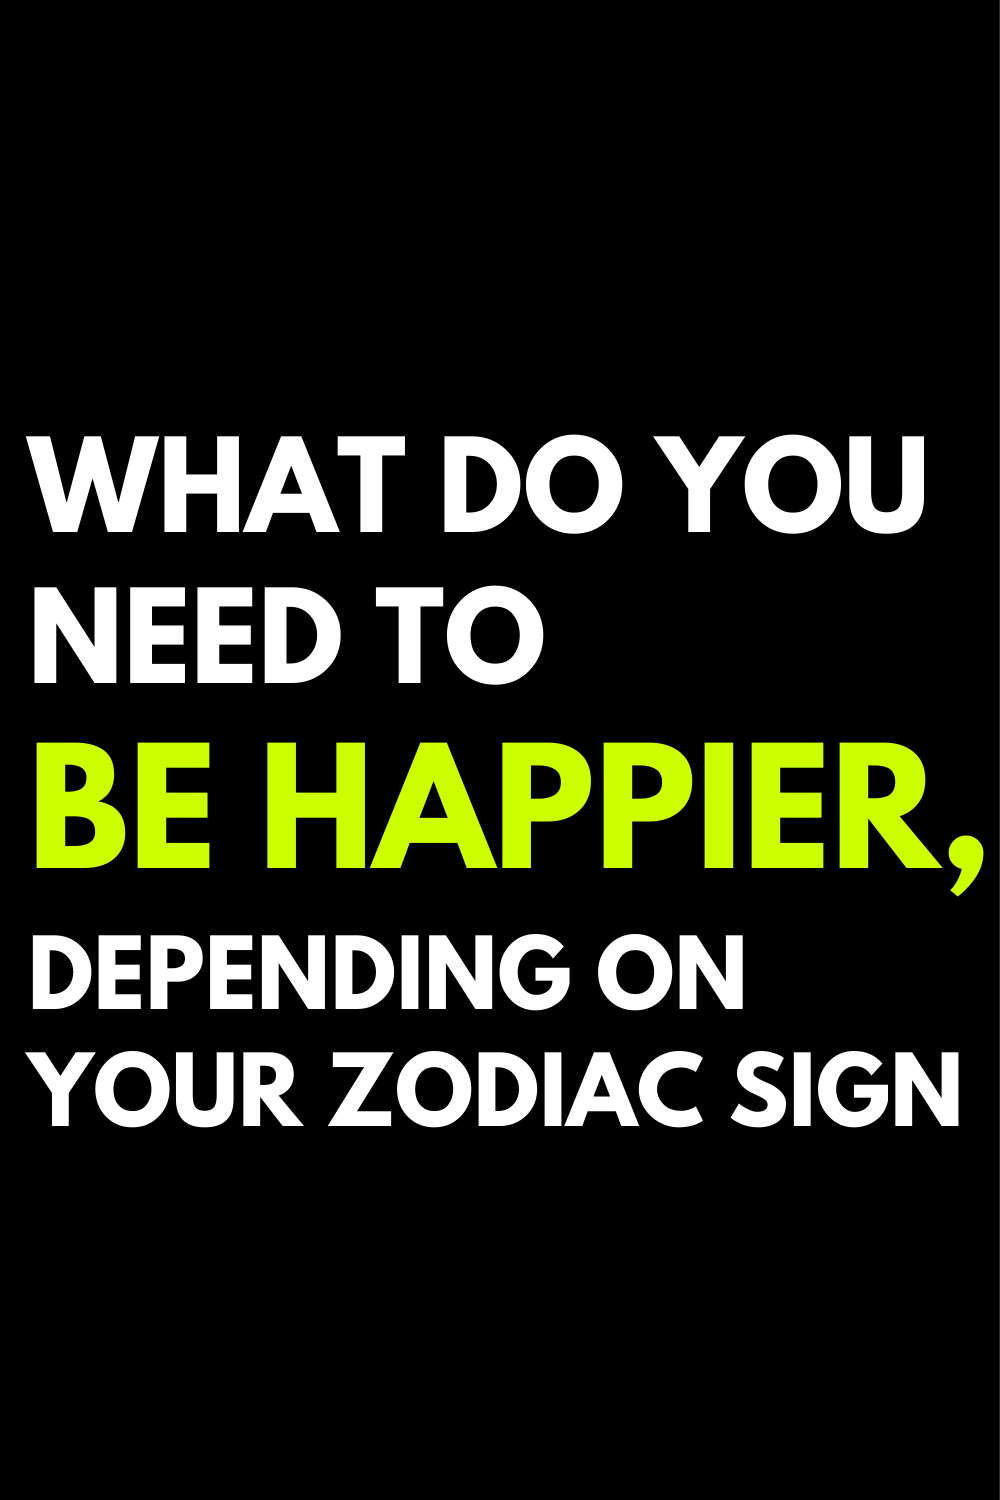 What do you need to be happier, depending on your zodiac sign